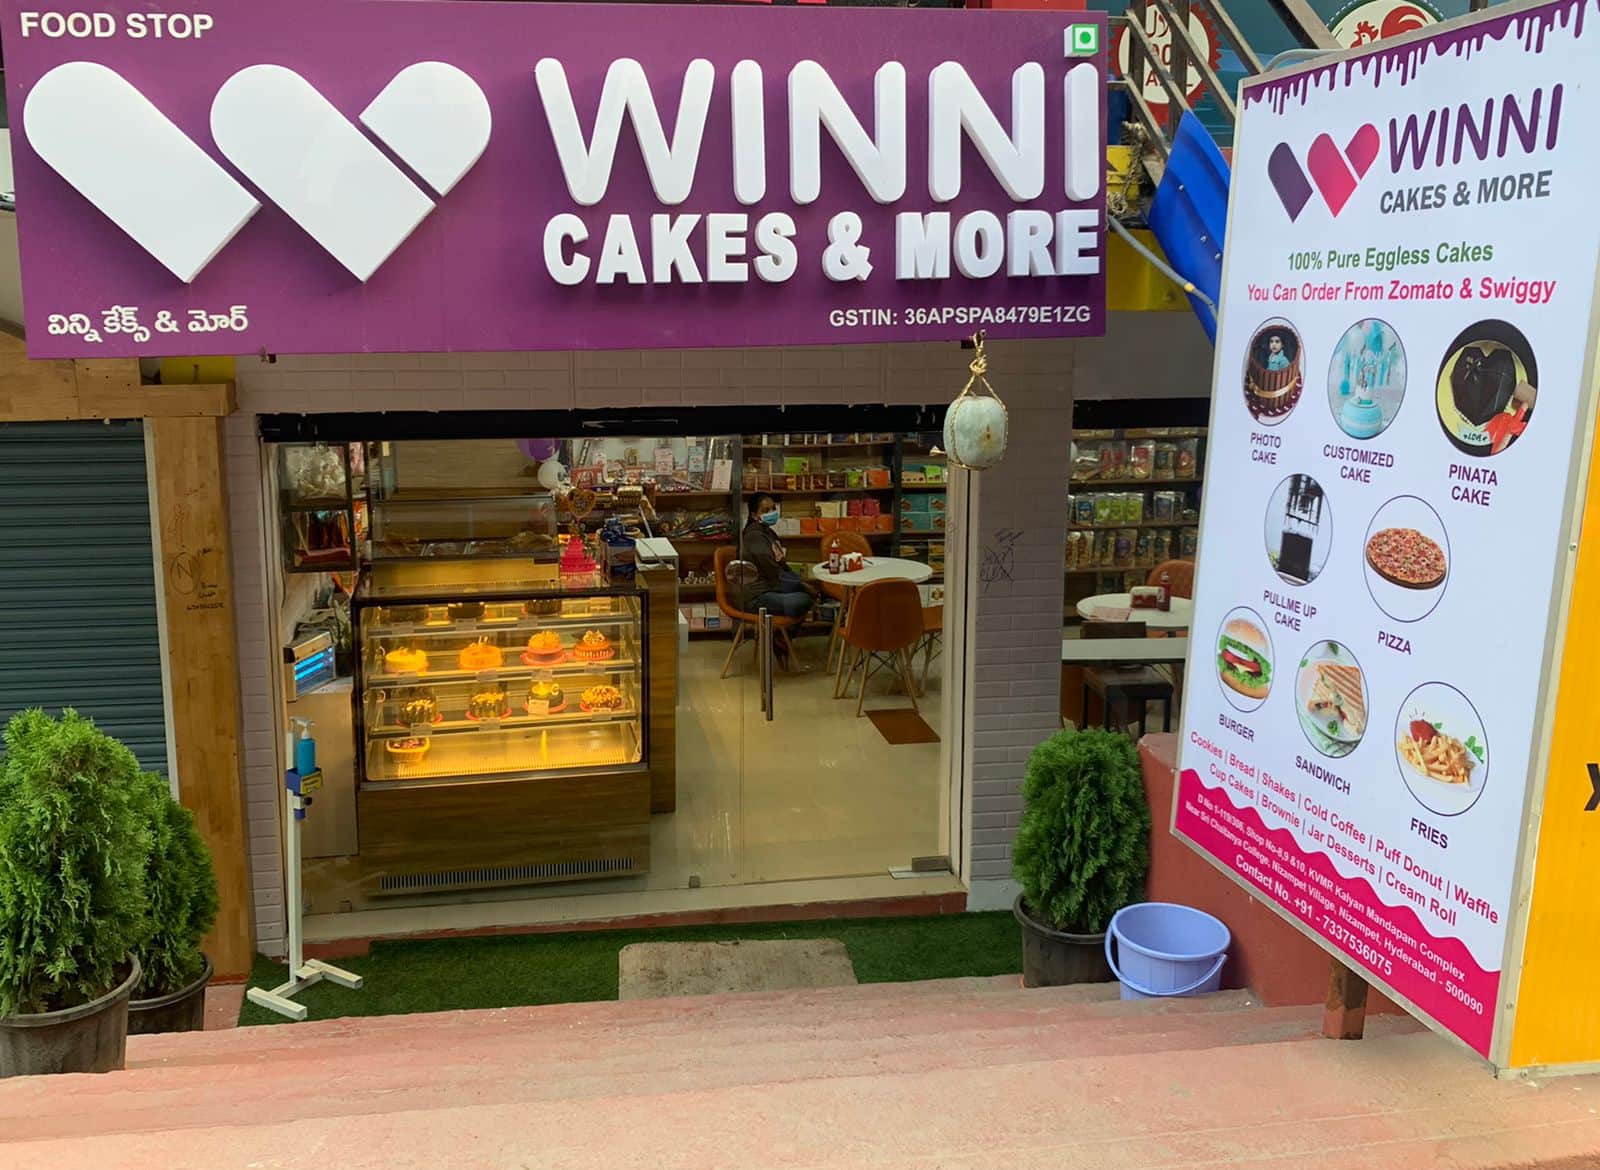 Winni - Cake, Flowers & Gifts - Apps on Google Play